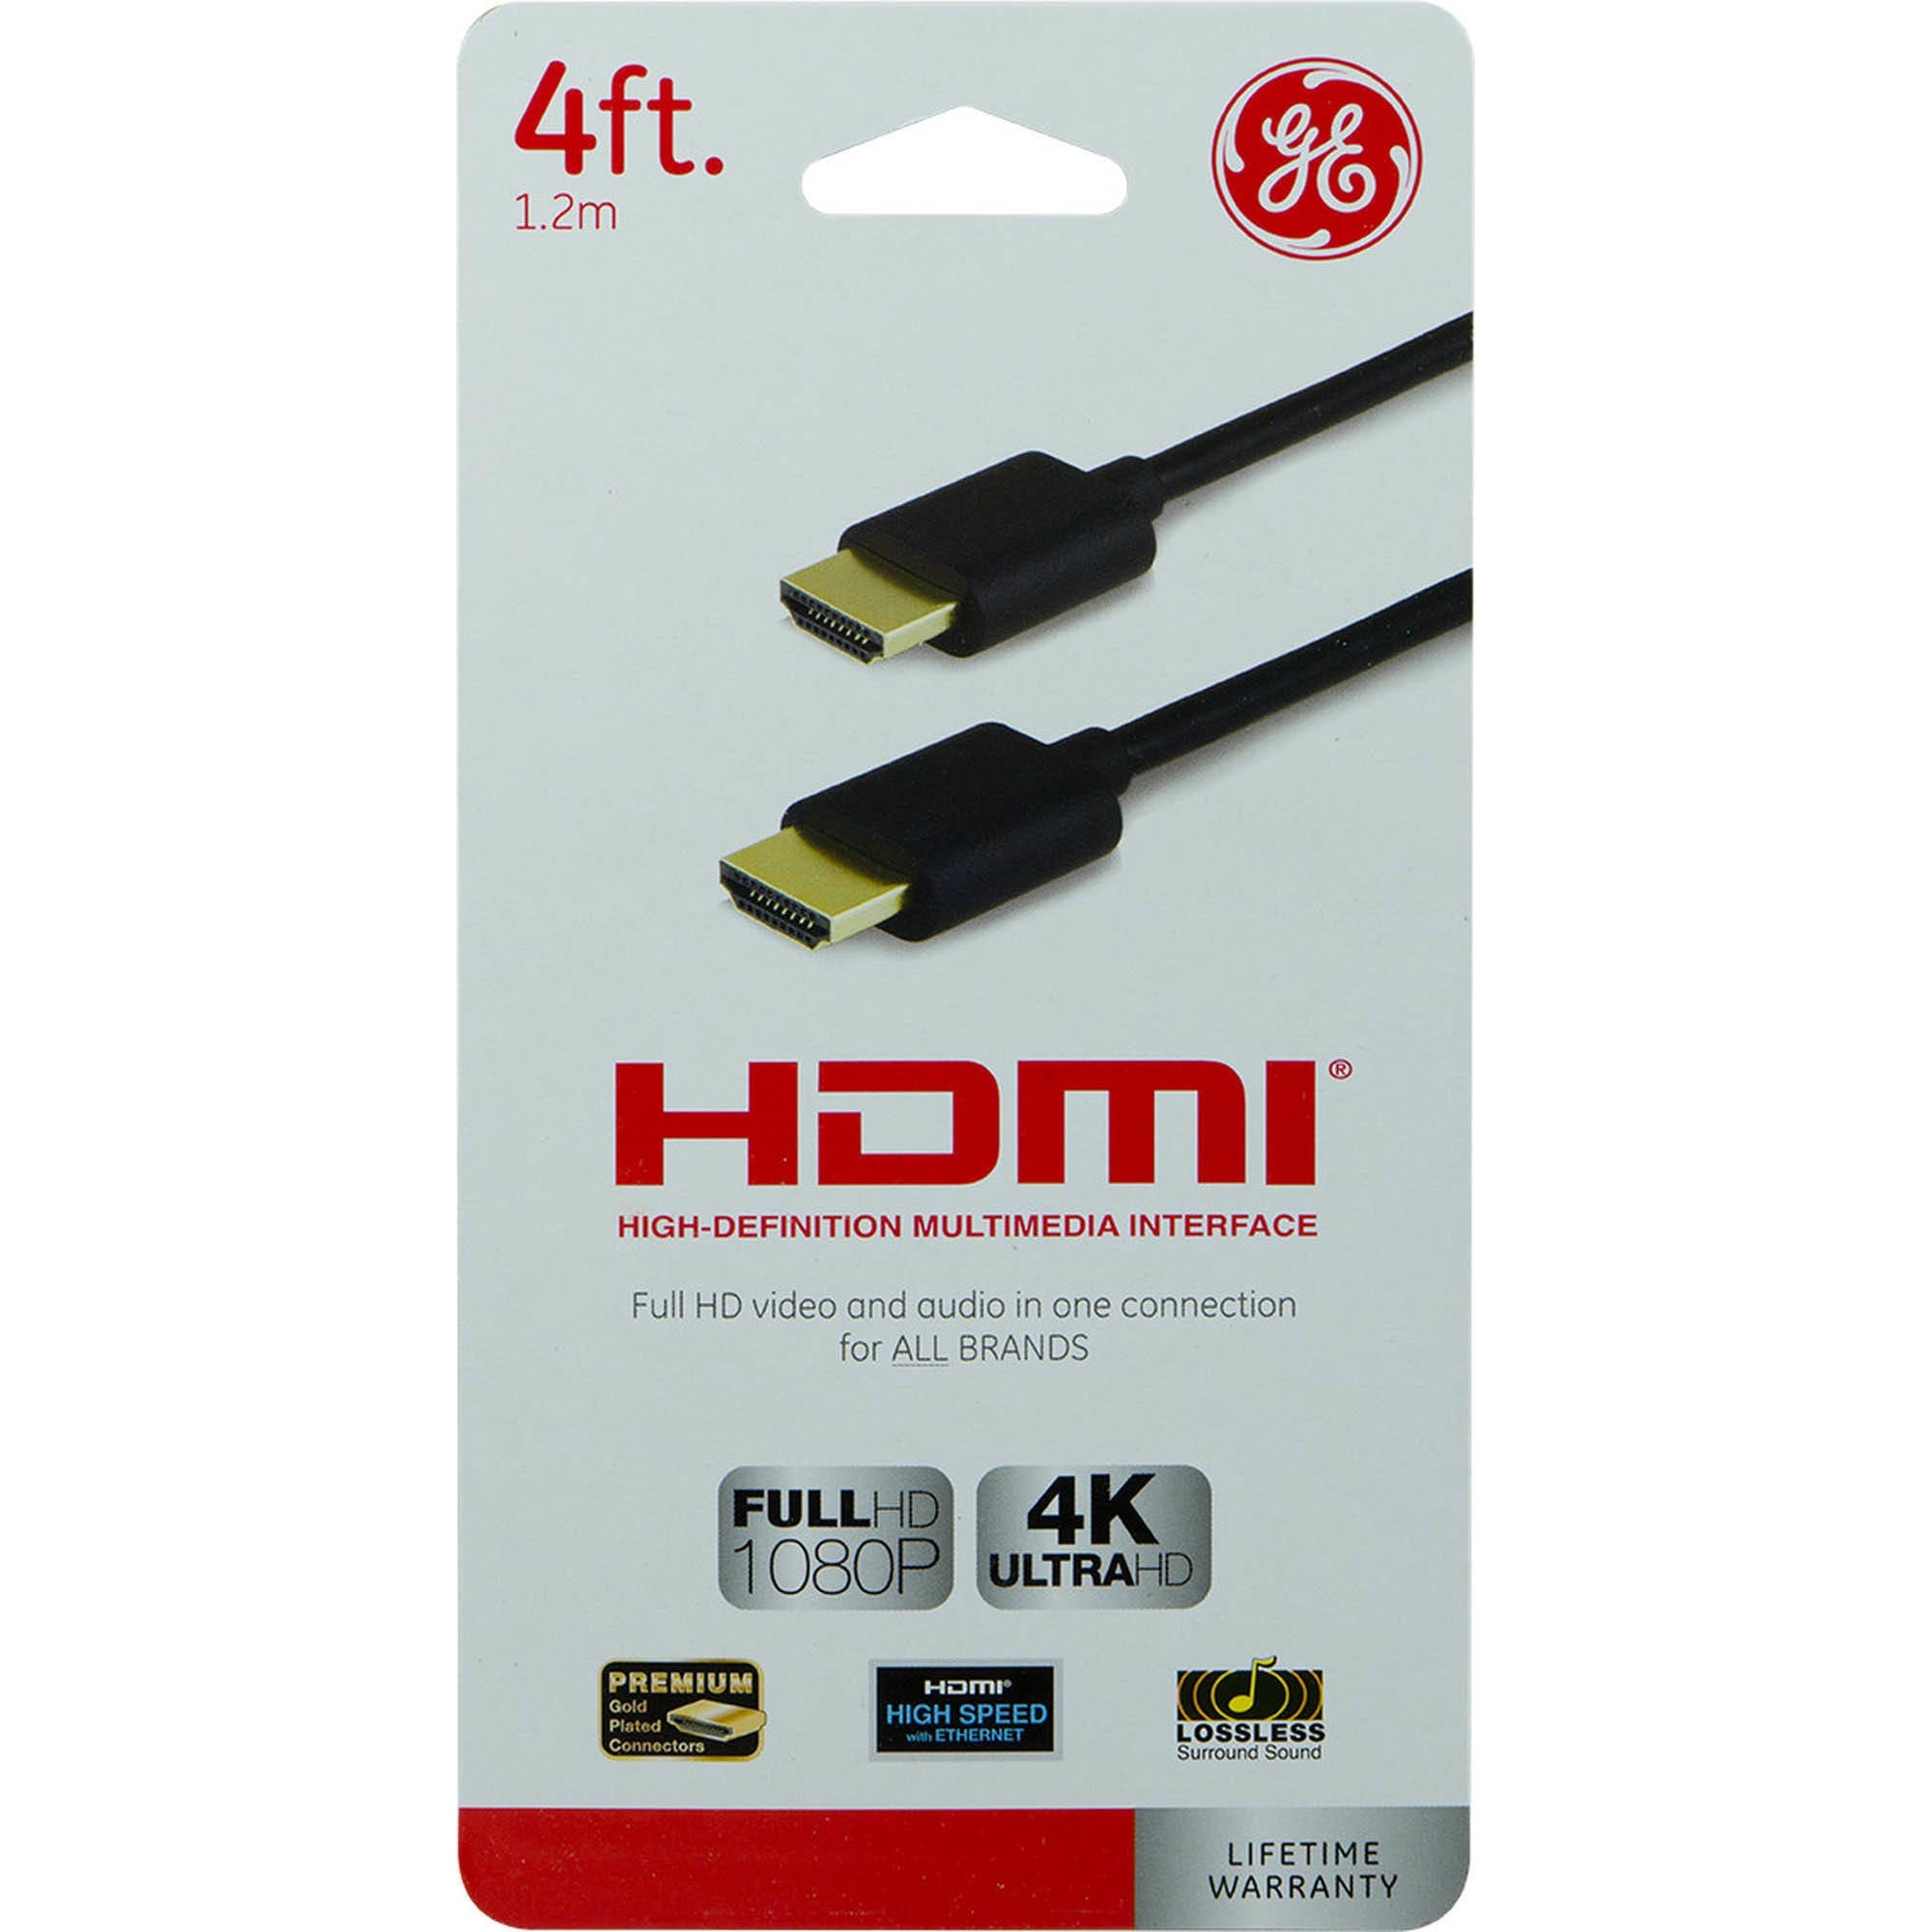 General Electic 4 ft. HDMI Cable with Ethernet, 1080P HD 4K, Black GE